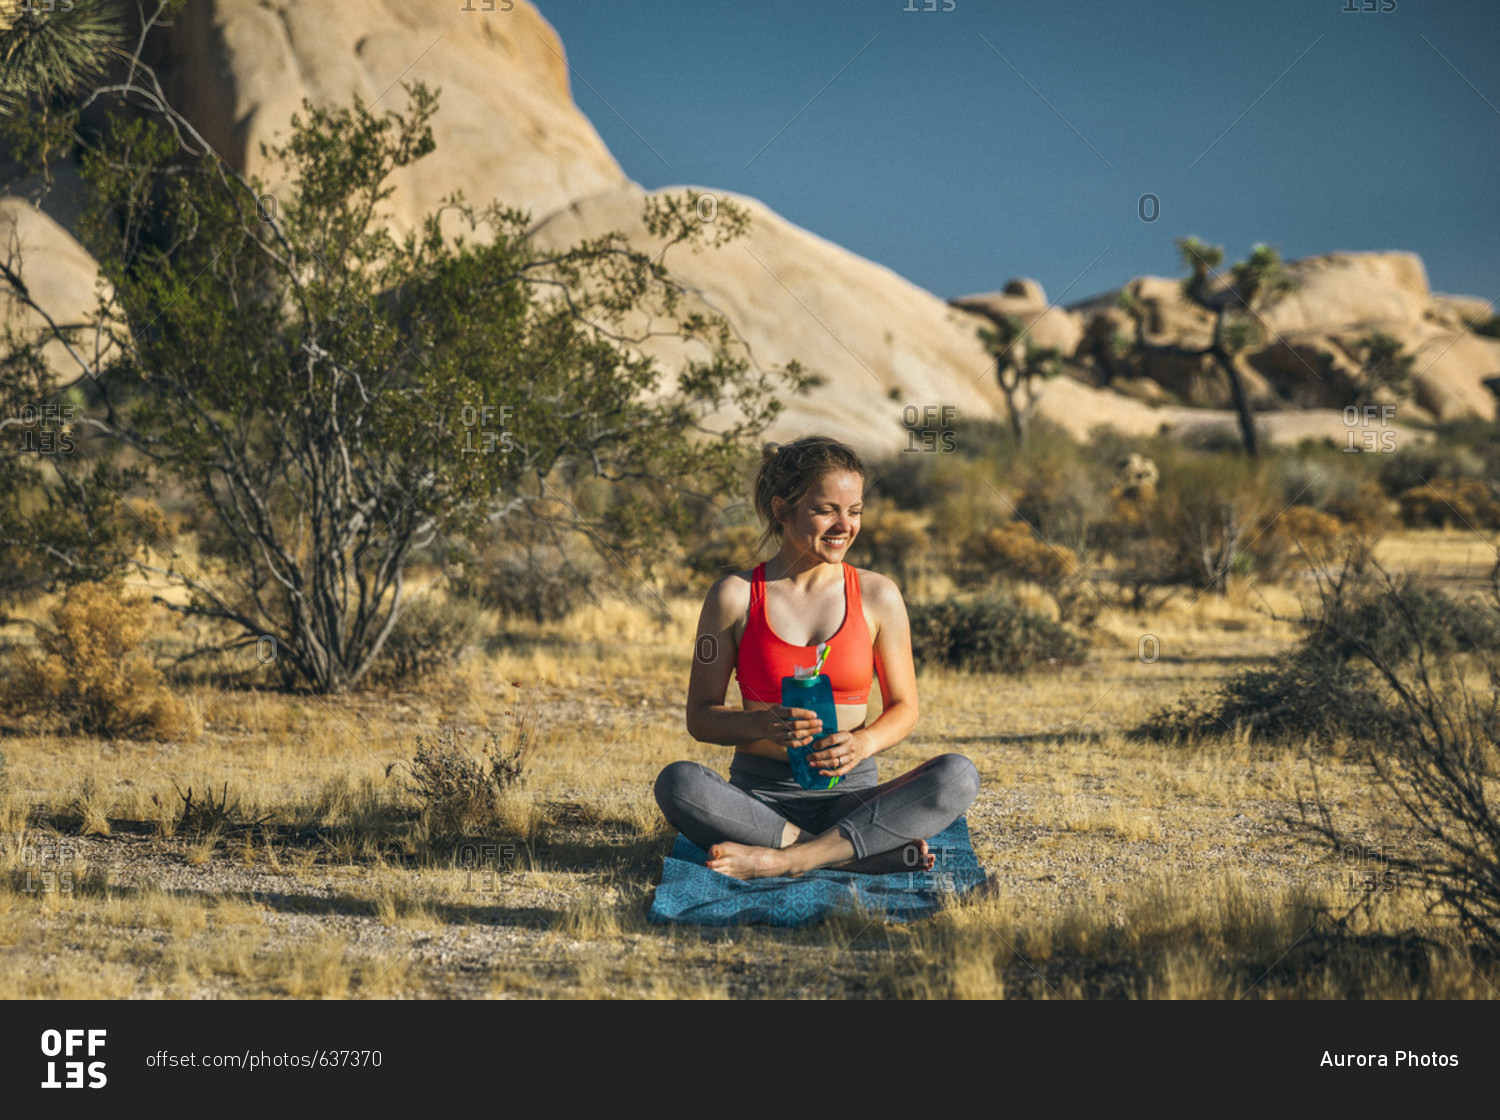 A young woman hydrates after doing yoga in Joshua Tree National Park